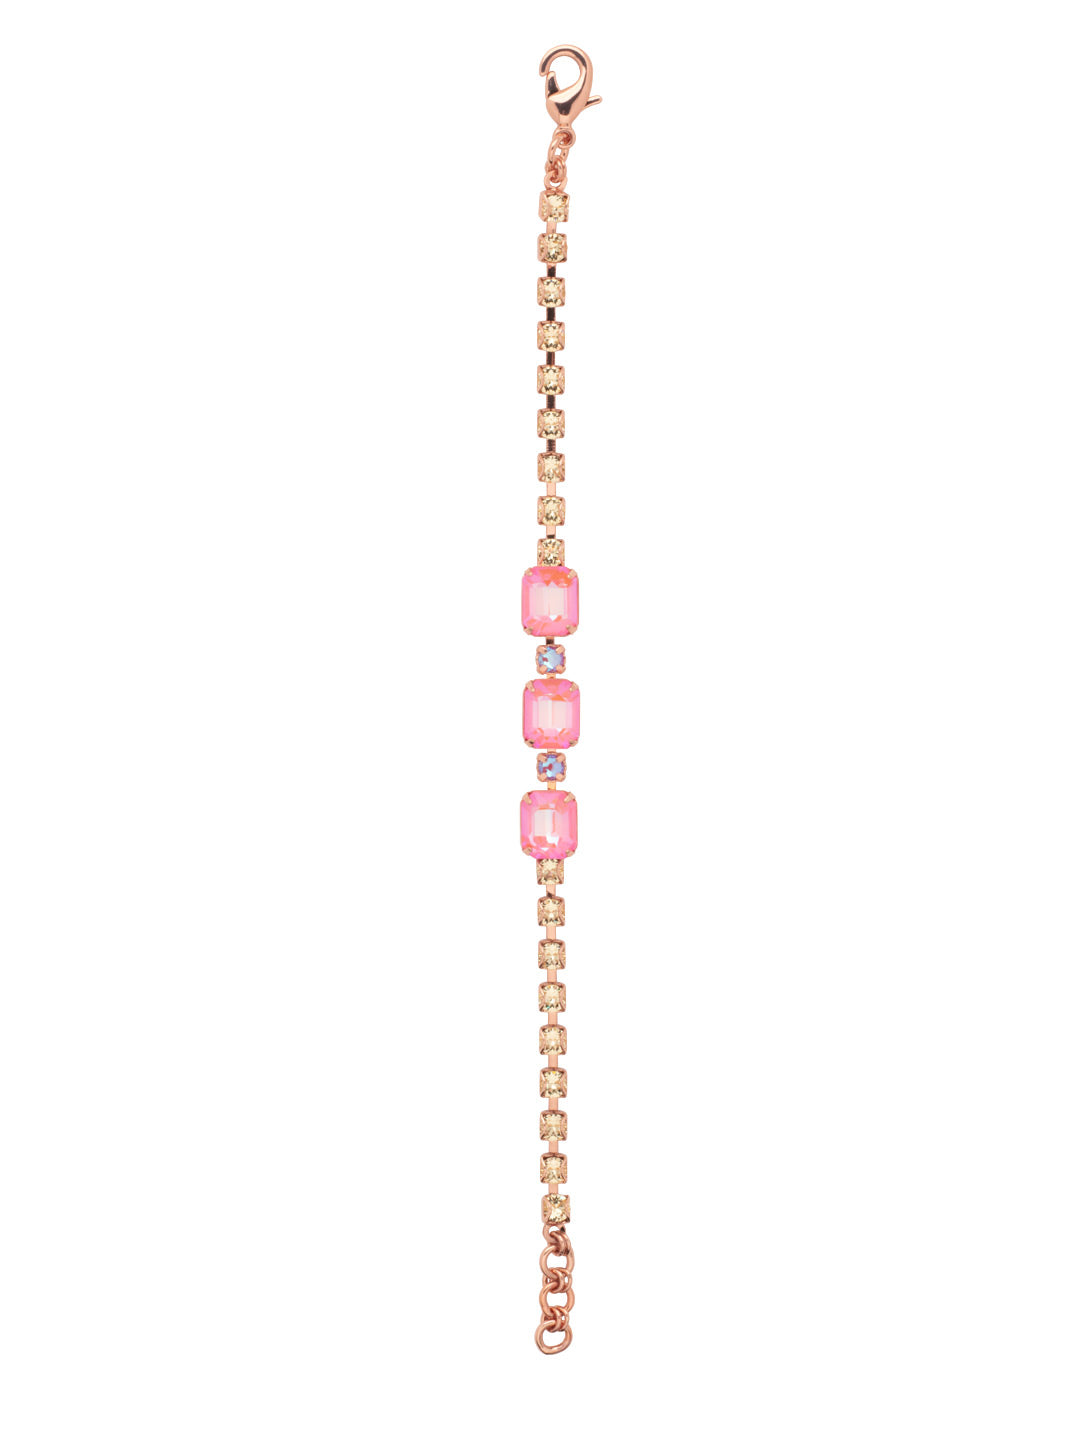 Octavia Triple Tennis Bracelet - BFF60RGPPN - <p>The Octavia Triple Tennis Bracelet features three octagon cut crystals on an adjustable crystal embellished chain, secured with a lobster claw clasp. From Sorrelli's Pink Pineapple collection in our Rose Gold-tone finish.</p>